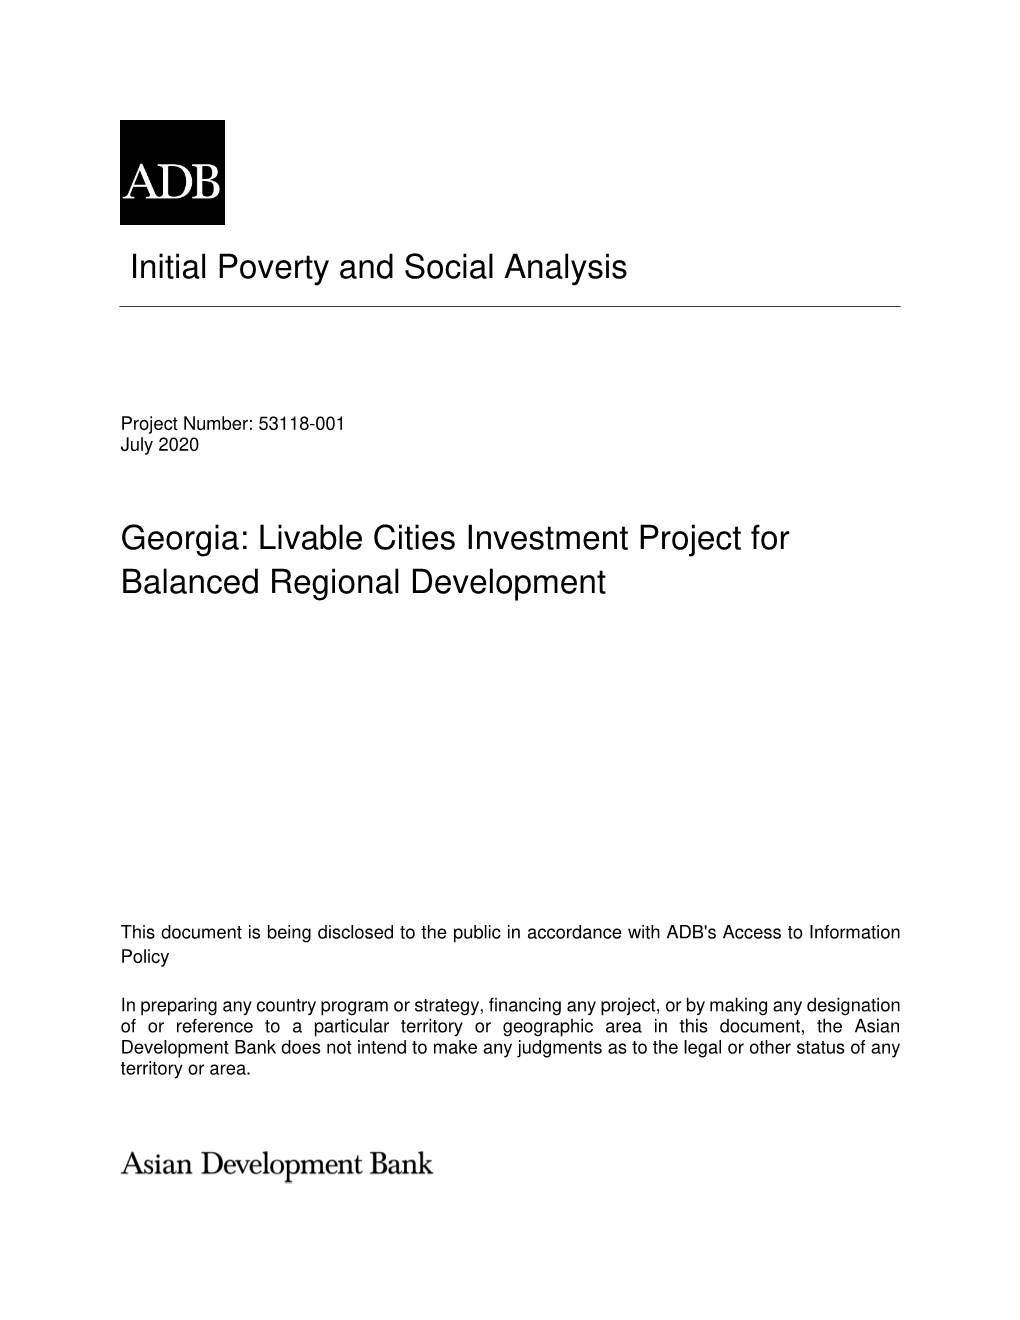 53118-001: Livable Cities Investment Project for Balanced Regional